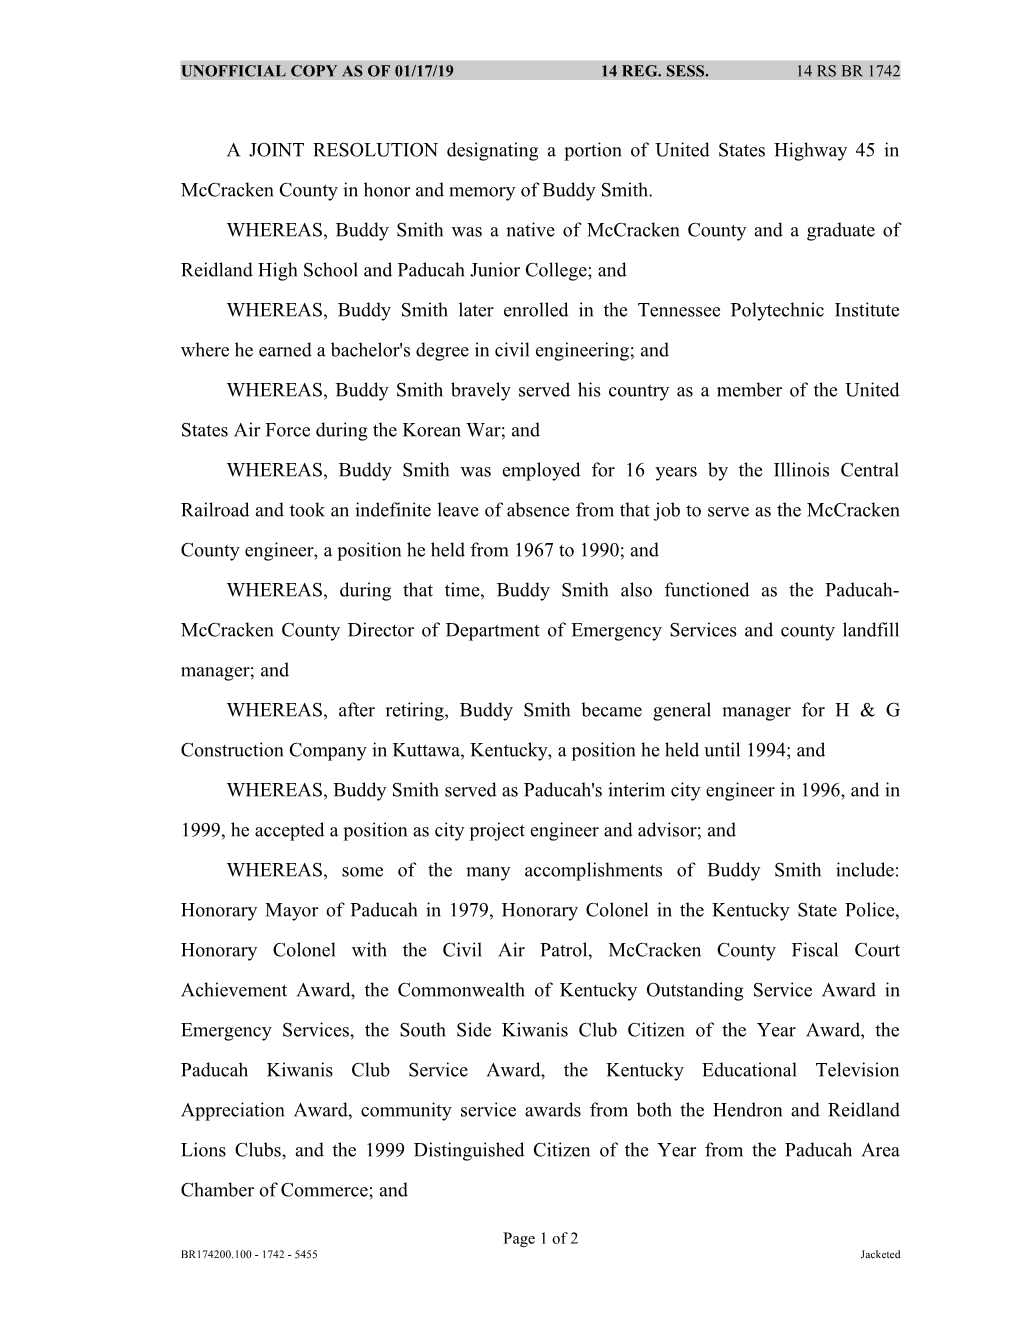 A JOINT RESOLUTION Designating a Portion of United States Highway 45 in Mccracken County